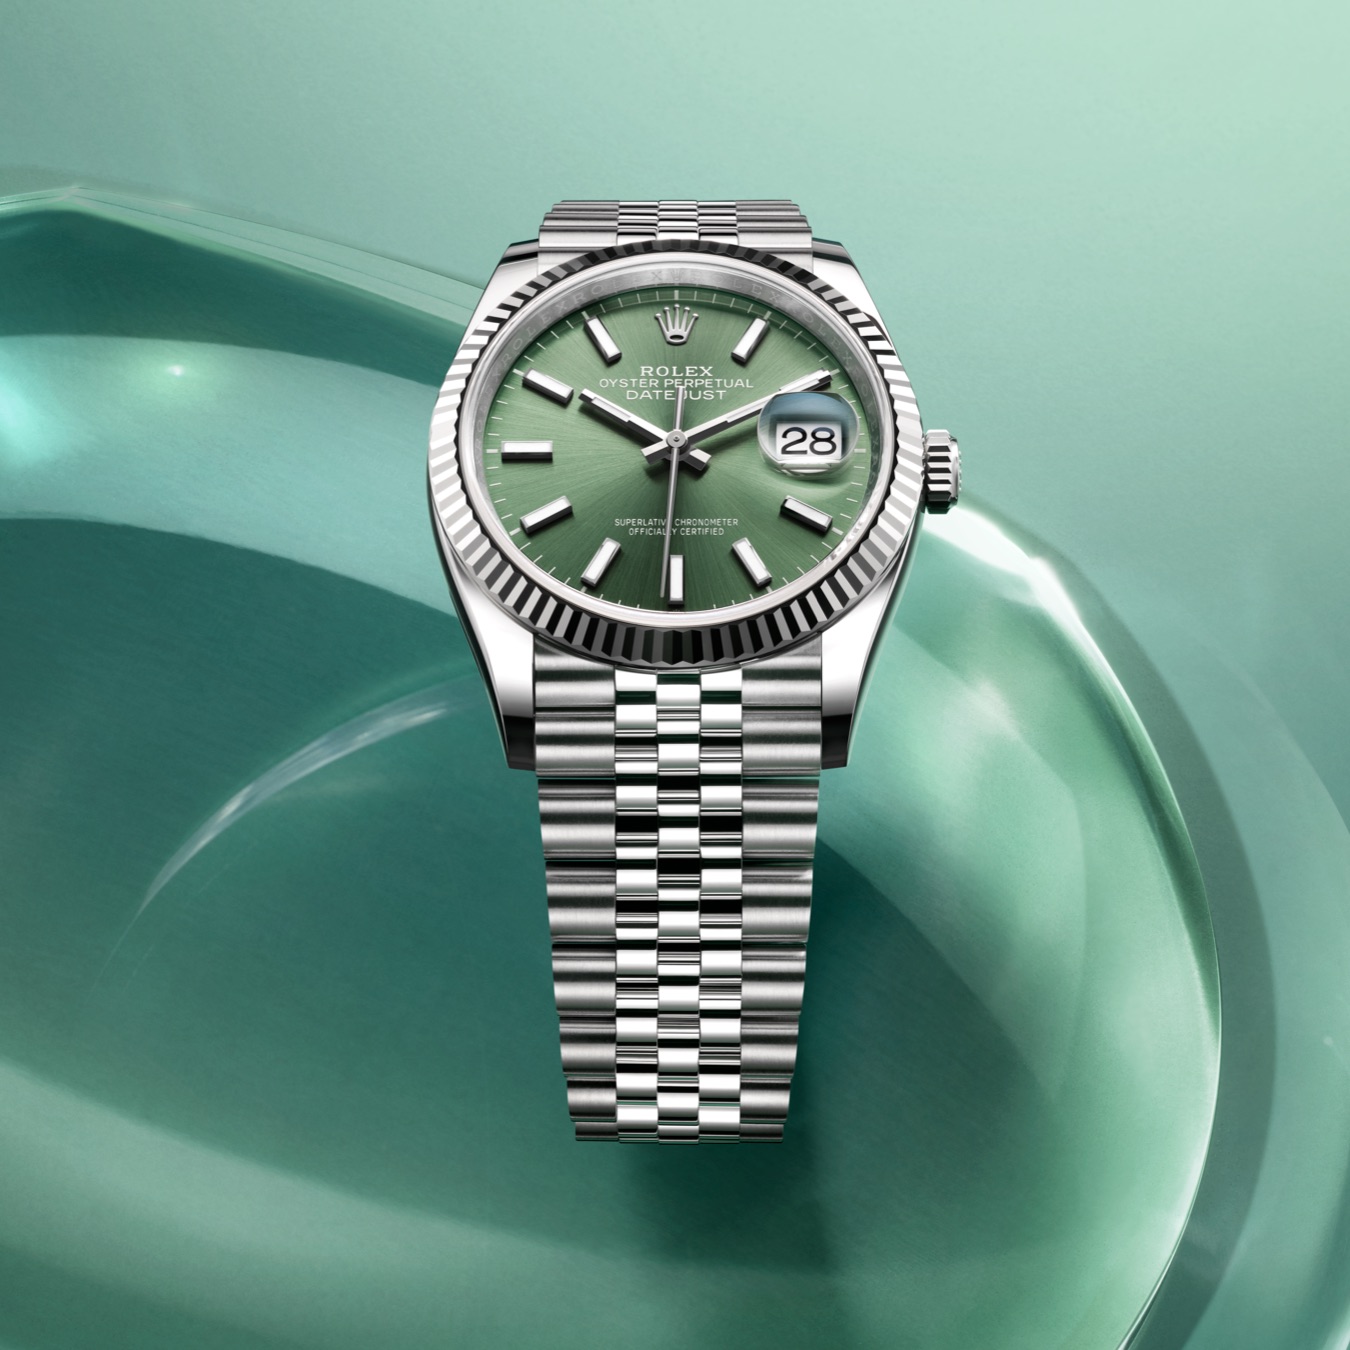 Rolex Datejust 41 in Oystersteel and white gold with green dial